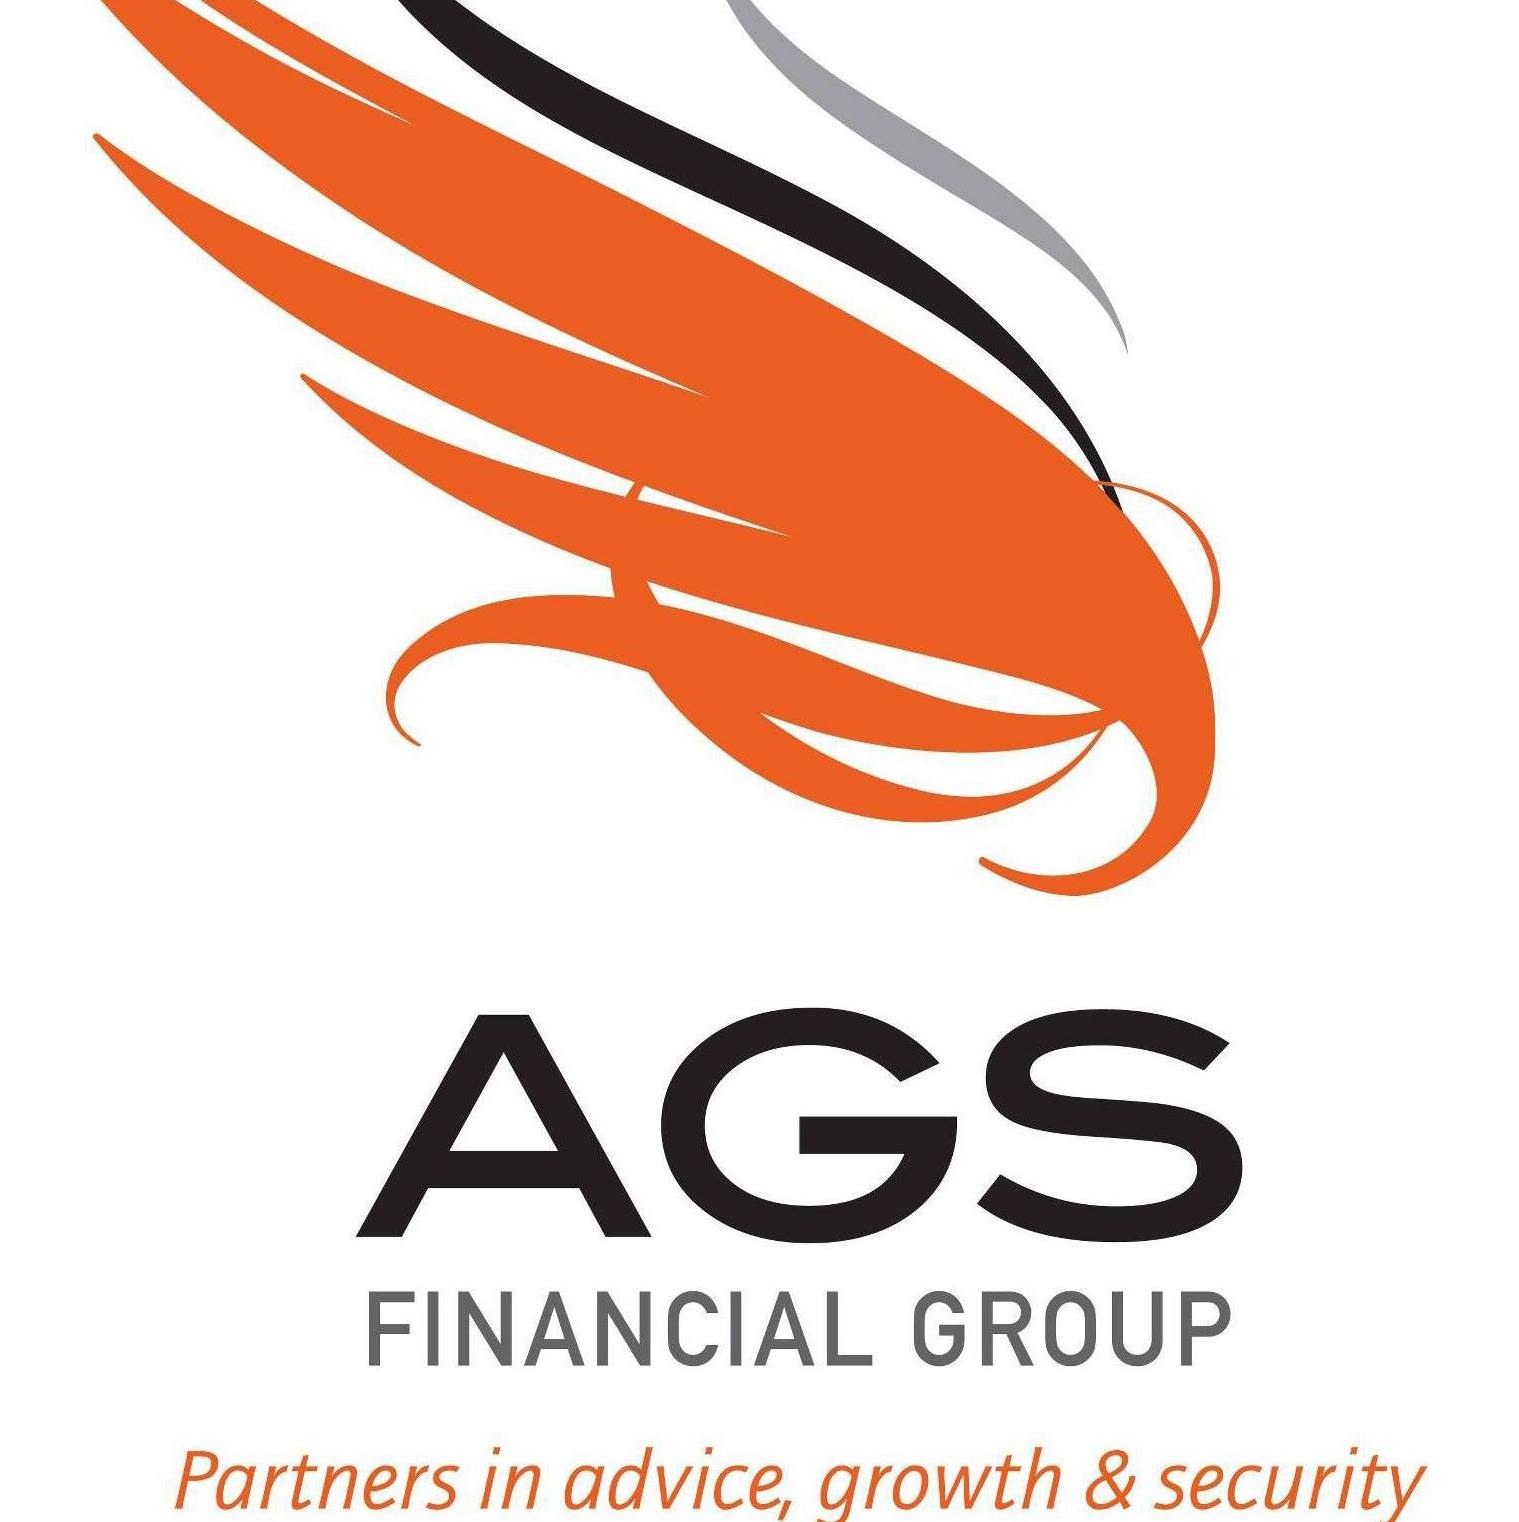 AGS Financial Group